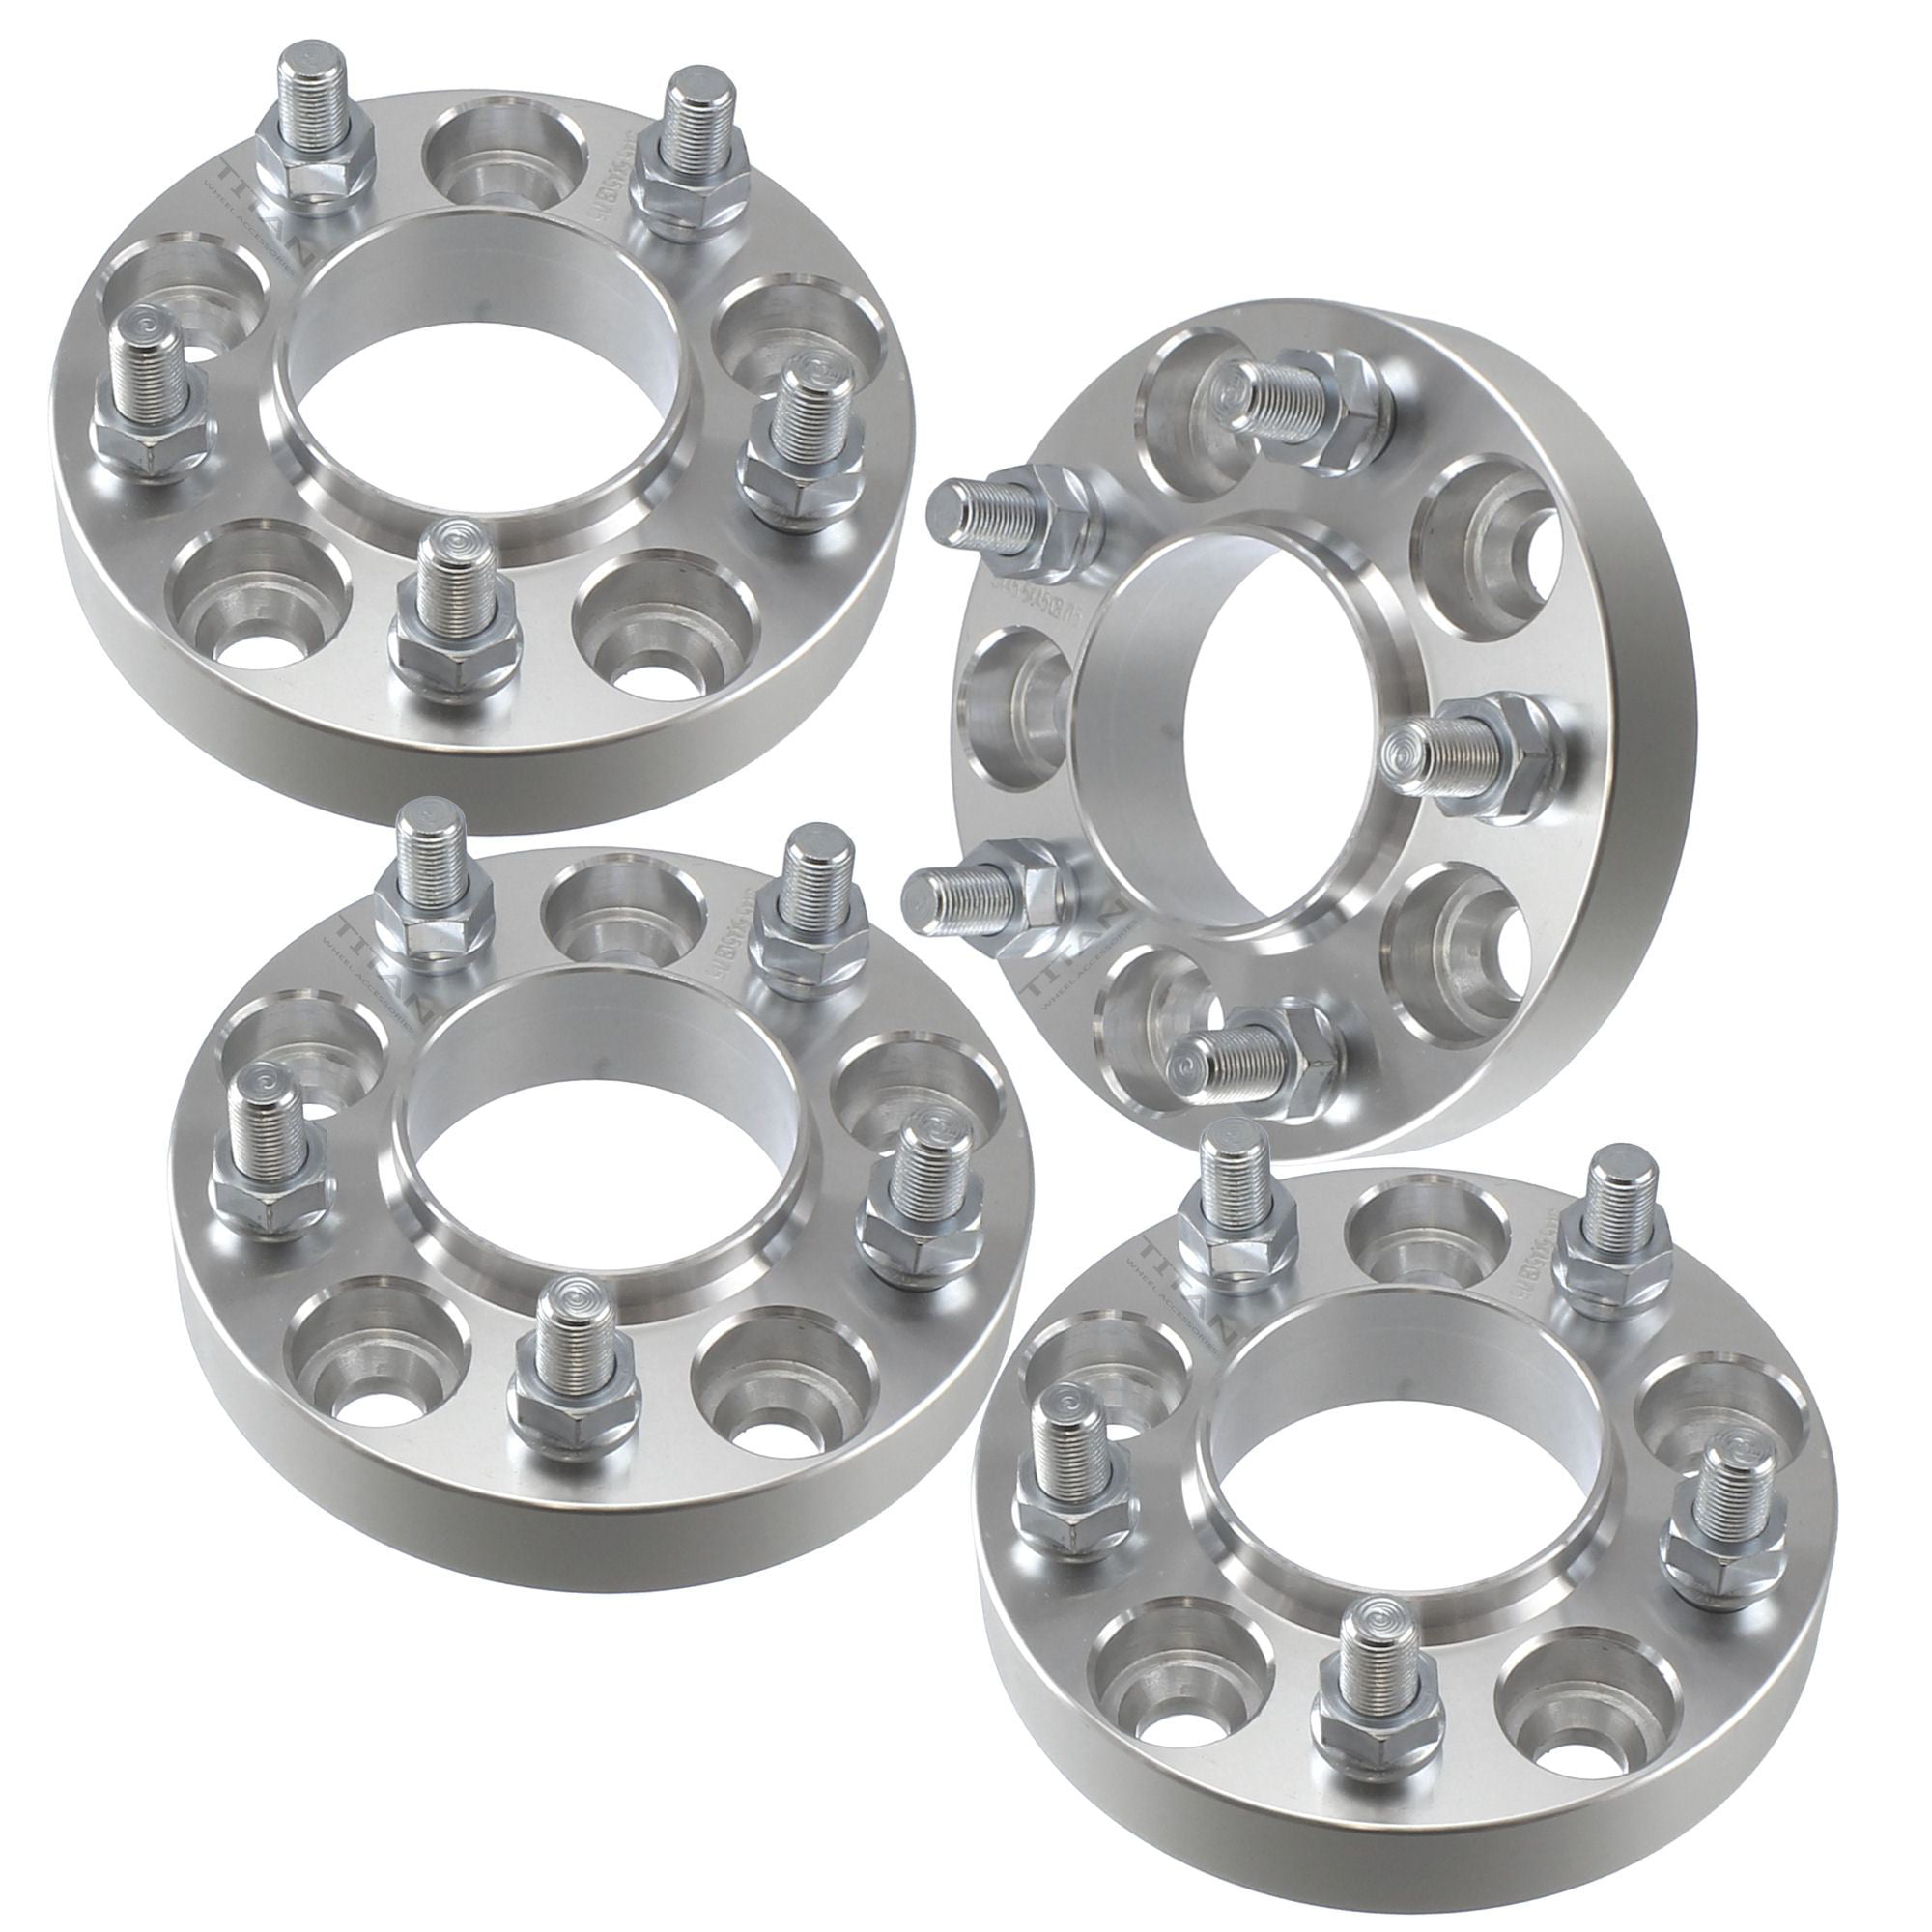 20mm Hubcentric Wheel Spacers 60.1mm 5x114.3 12x1.5 2pcs fits Lexus & Toyota